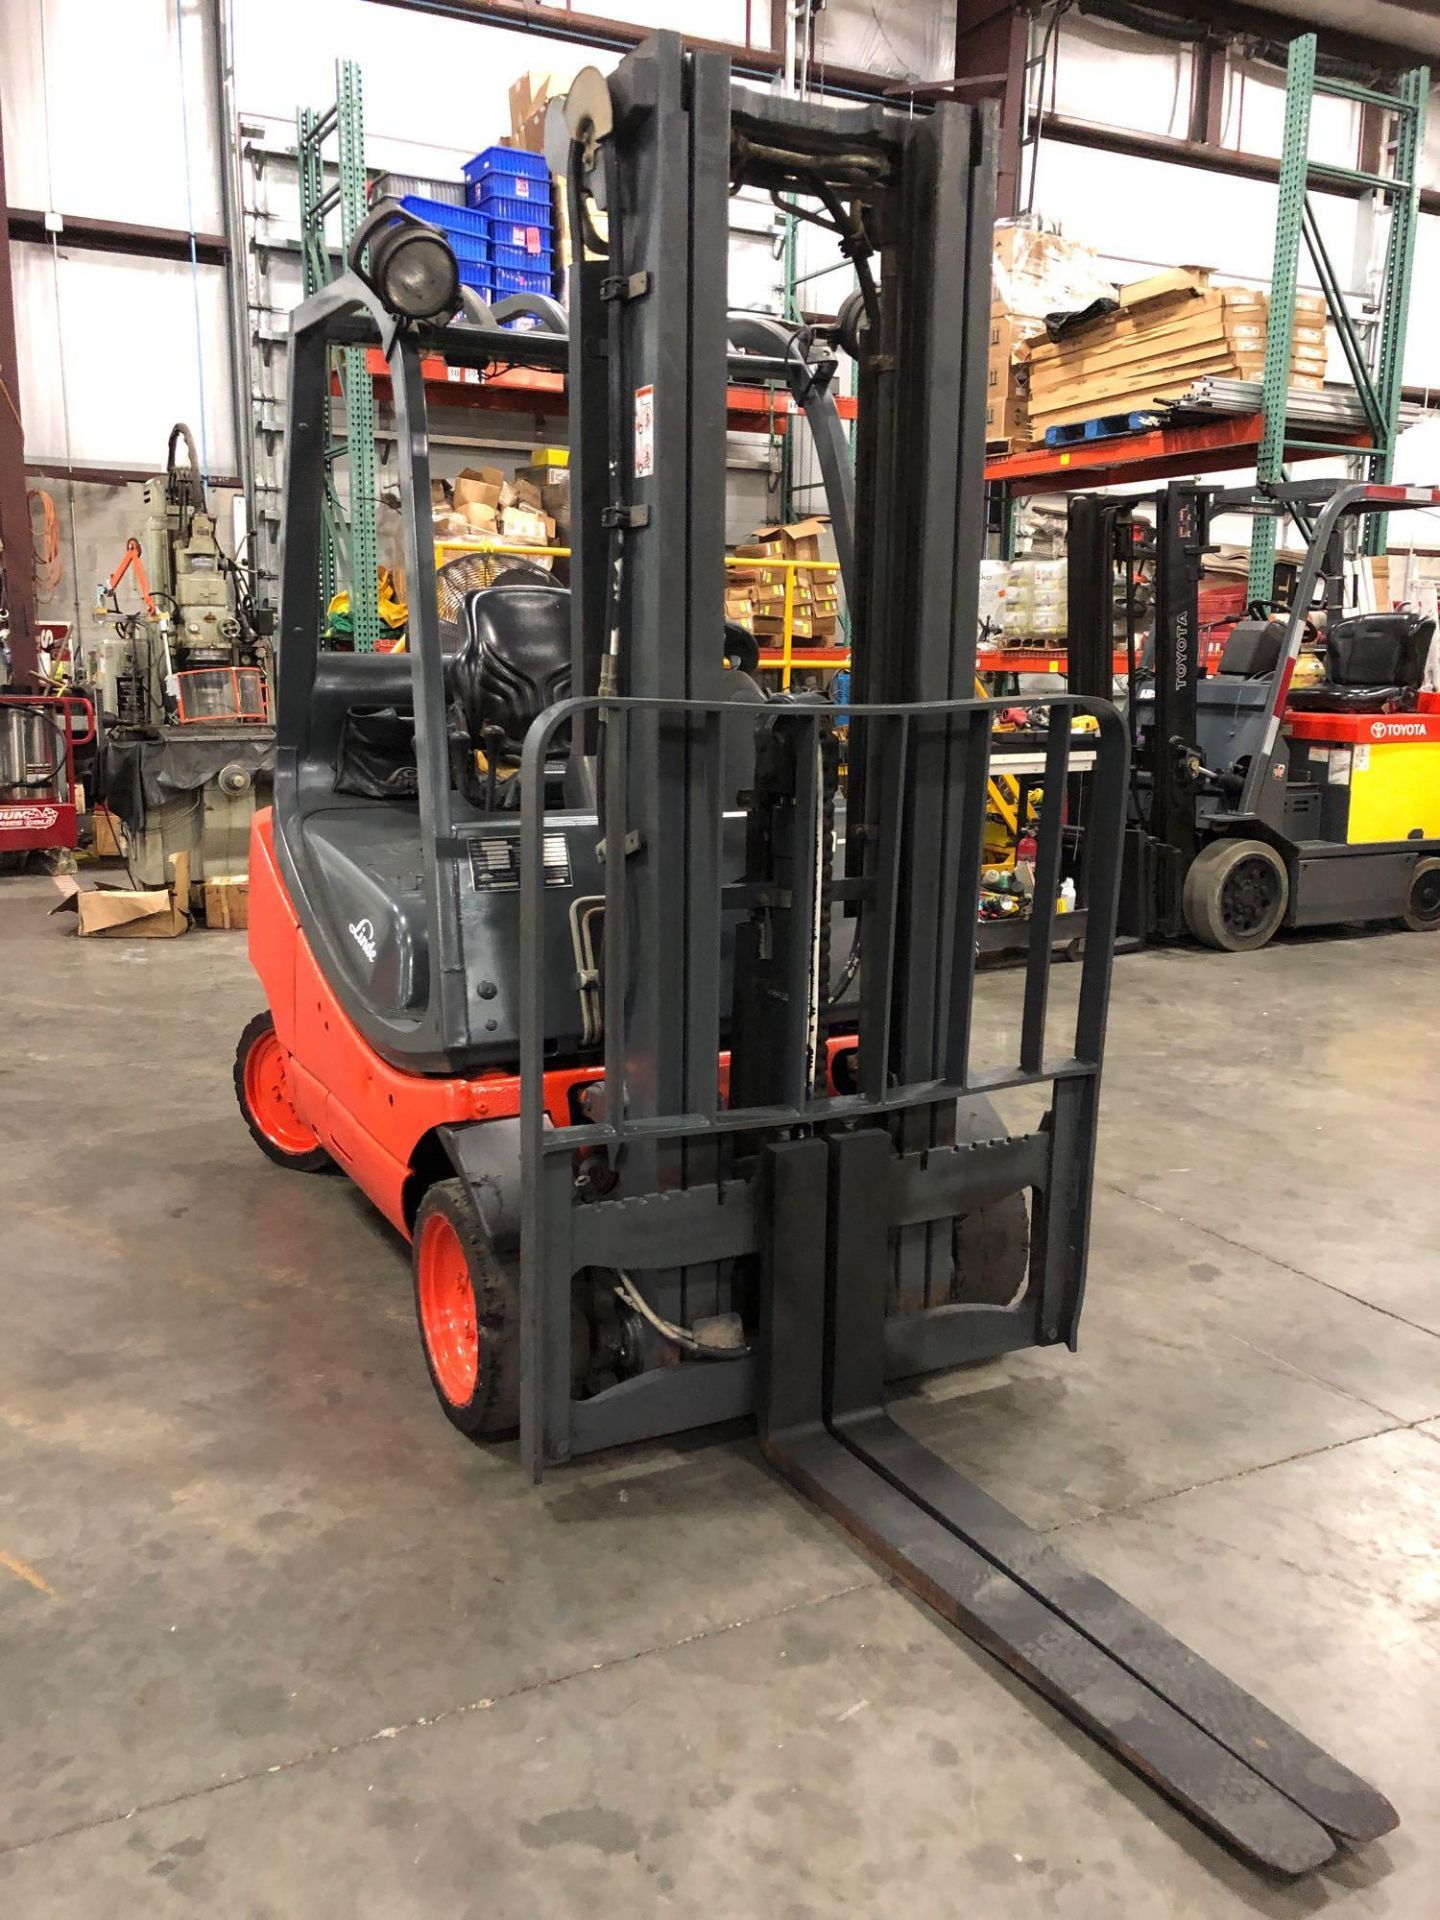 LINDE DIESEL FORKLIFT MODEL H20CD, 4,500 LB CAPACITY, 175" HEIGHT CAPACITY, TILT, RUNS AND OPERATES - Image 2 of 5